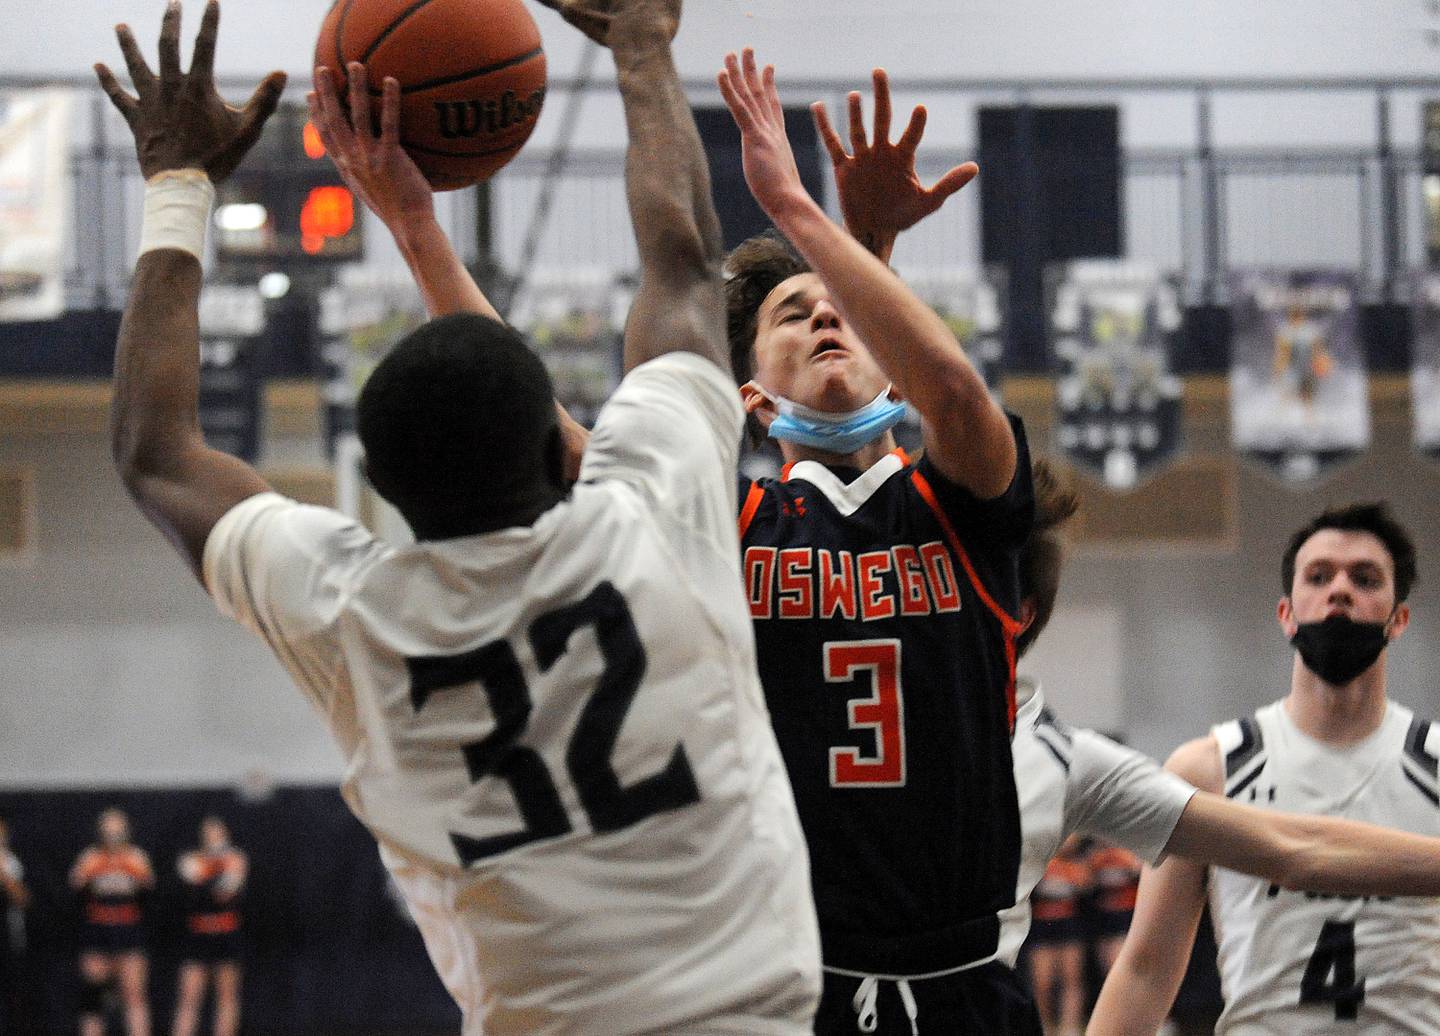 Oswego's Max Niesman (3) makes a tough shot and gets the foul by Oswego East's Gavin Garcon  (32) on Friday, February 11, 2022 at Oswego East High School.